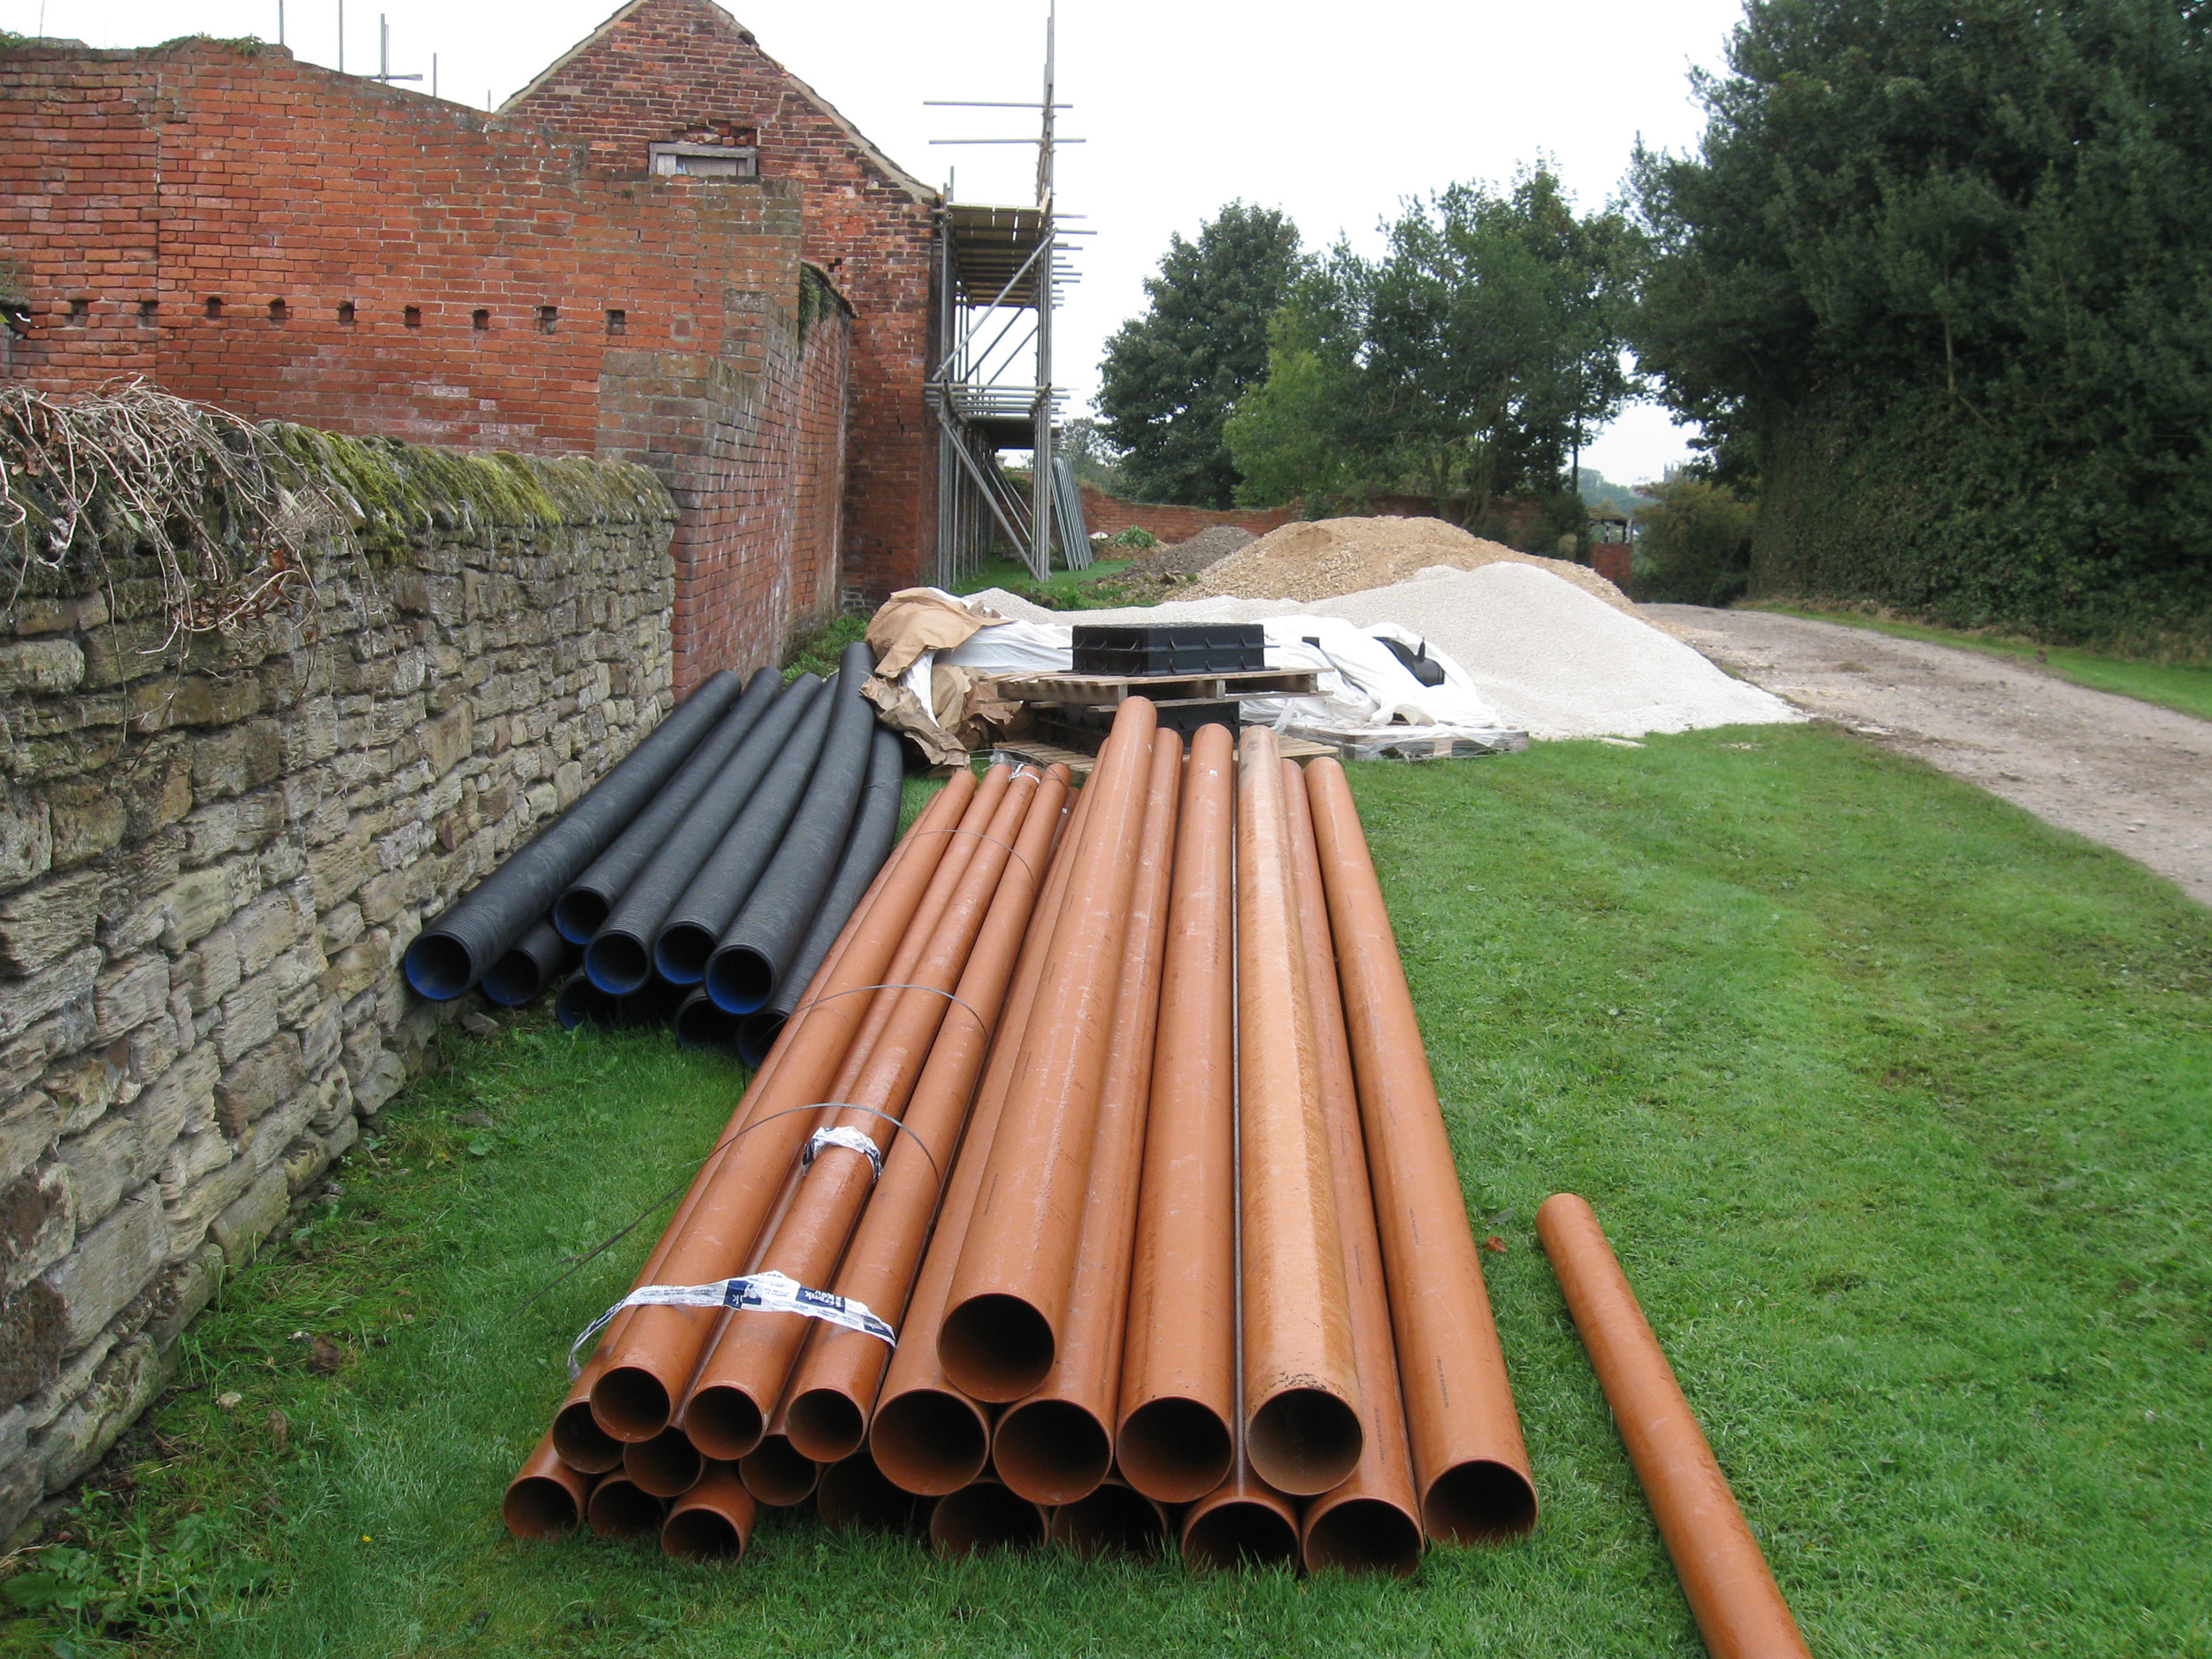  Sewer pipes ready to lay 